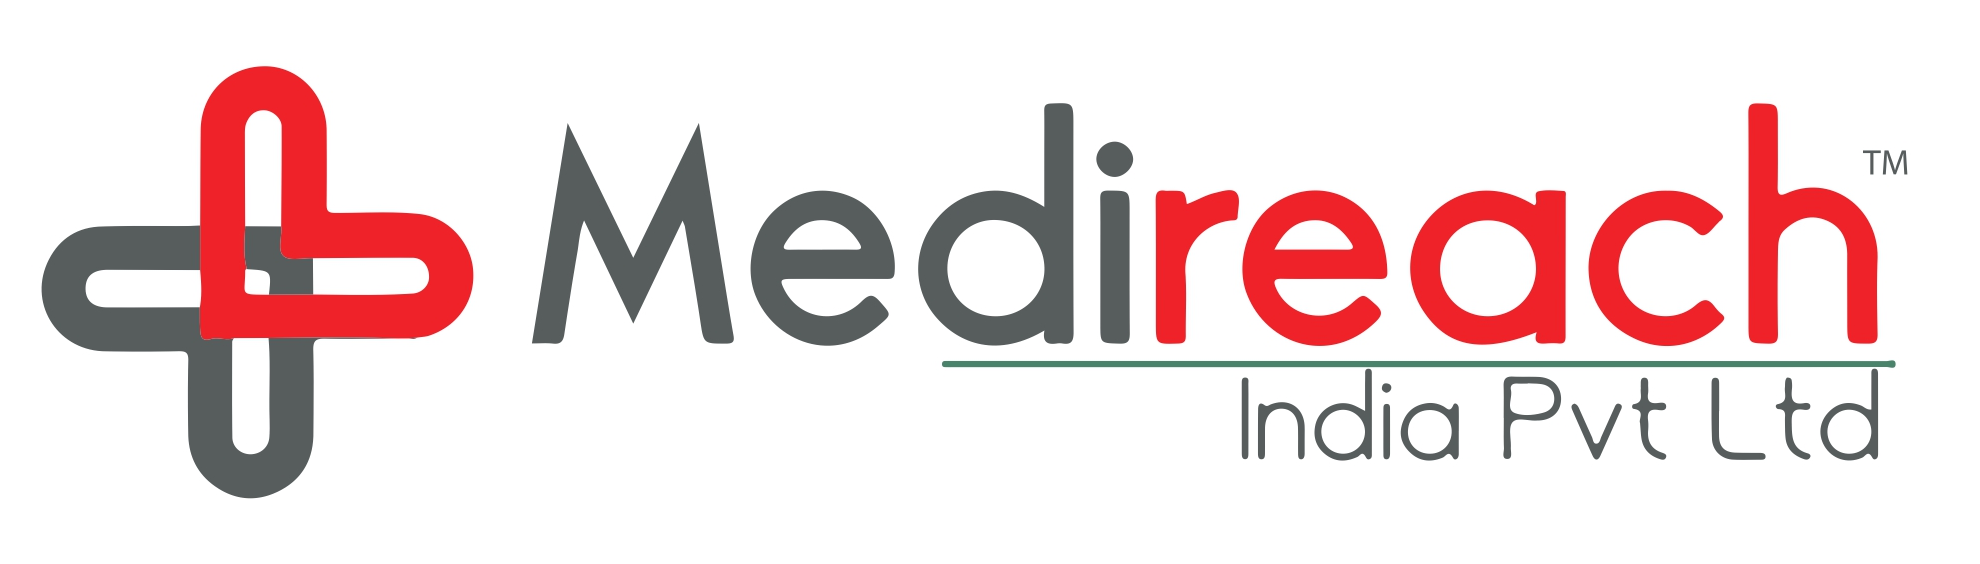 Medireach India Private Limited 